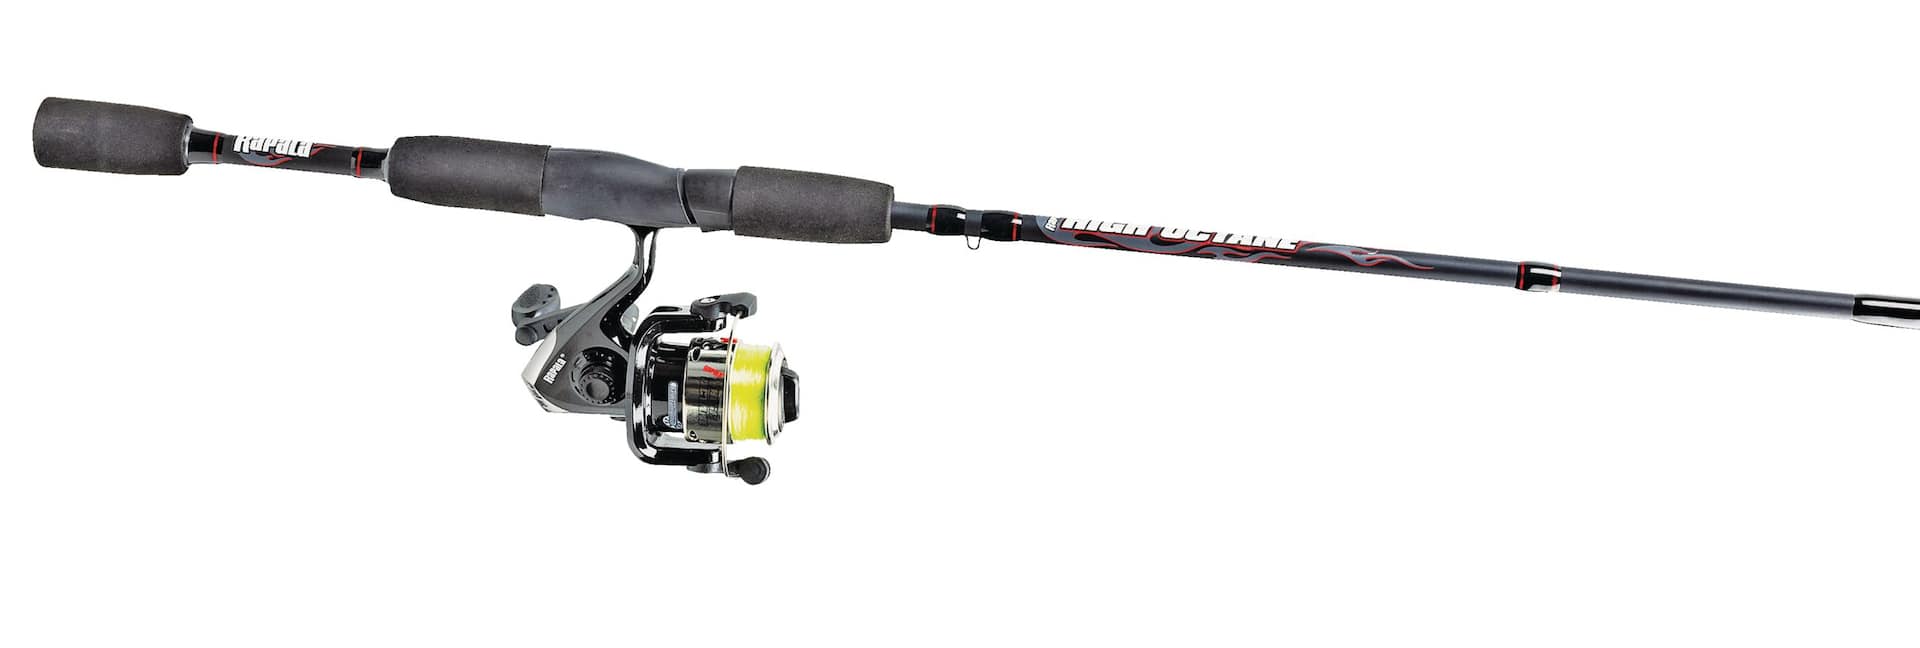 Red Wolf Fishing Rod at Canadian Tire